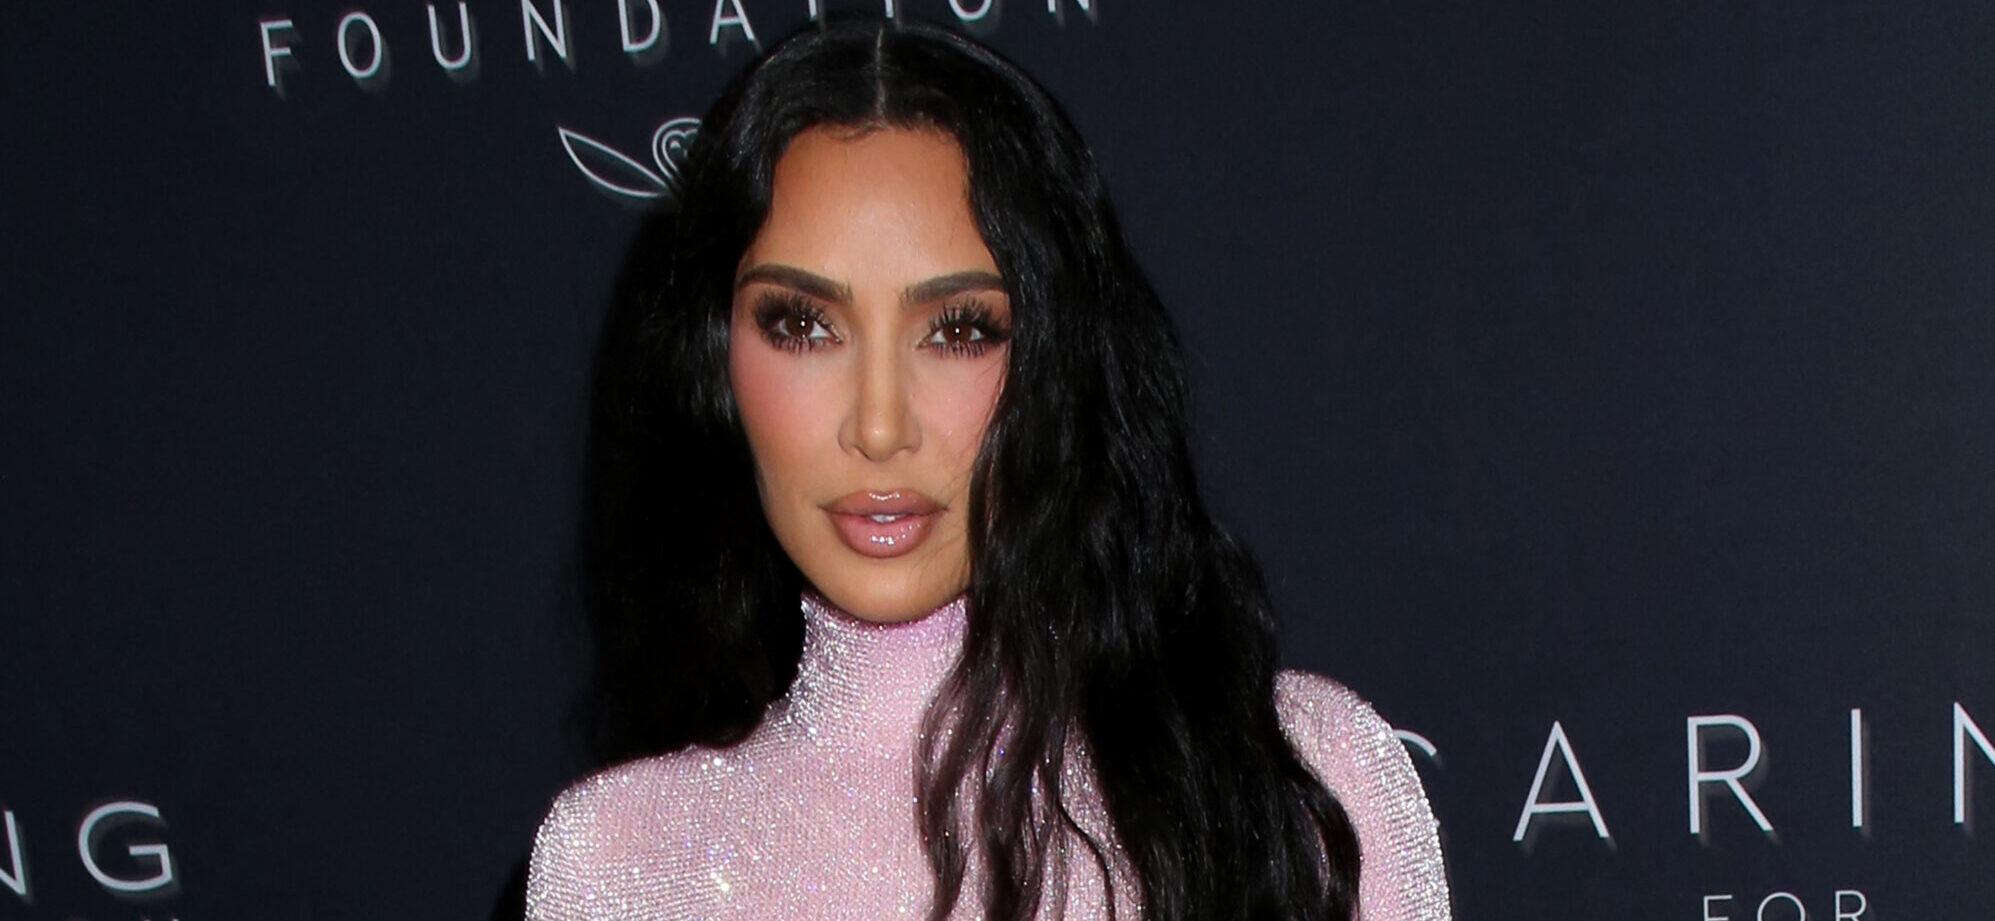 Kim Kardashian’s Birthday Blooms Take Over IG: 15 Ridiculous Flower Pics You Can’t Miss!